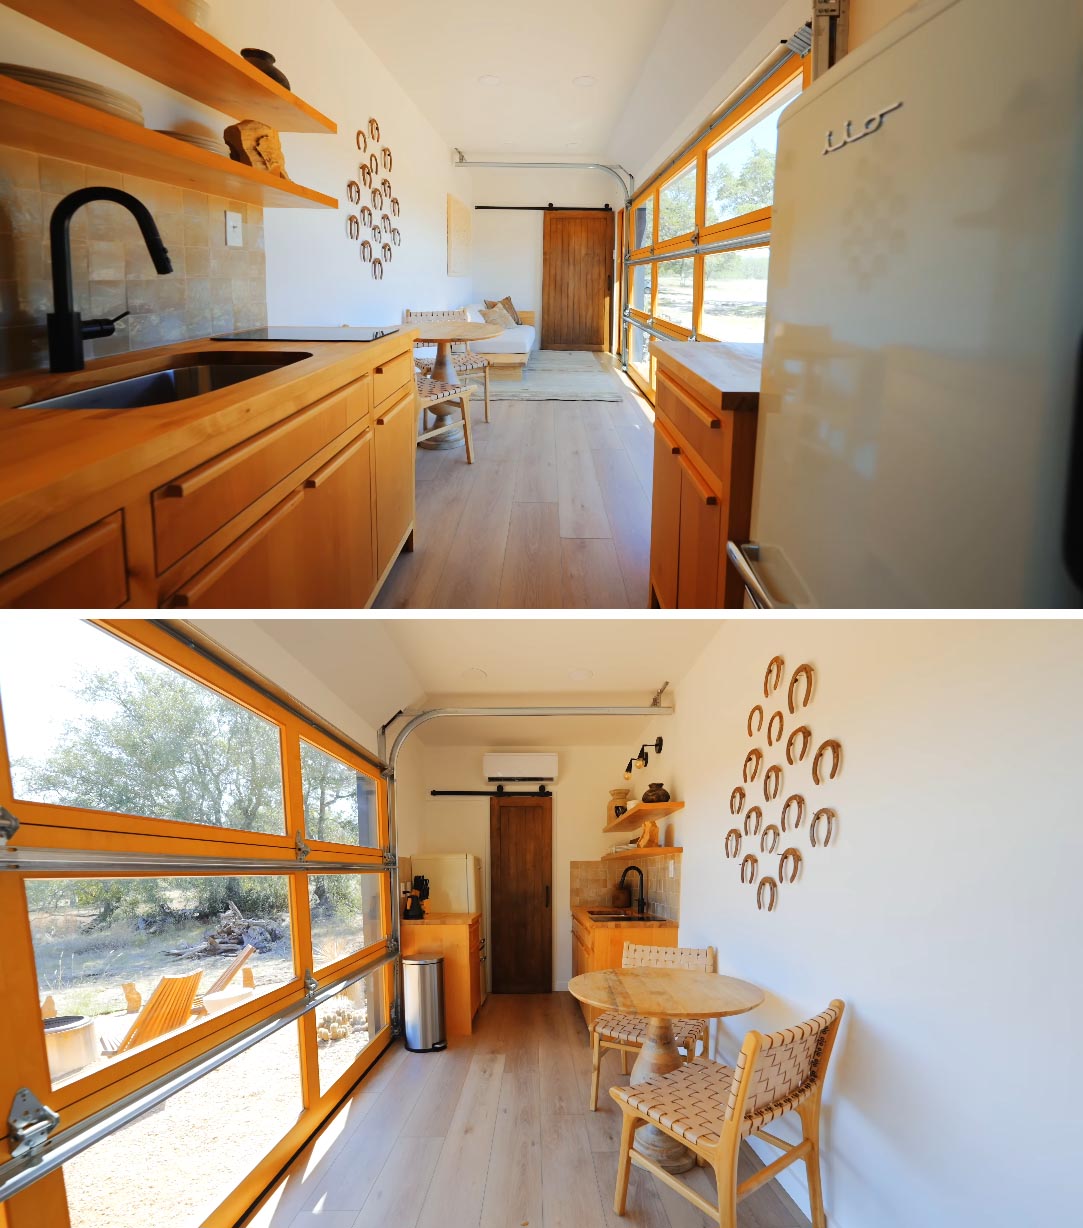 A tiny home made from a shipping container includes a main room with the living area, dining area, and kitchen with custom cabinets. A garage door can be opened to connect the living space with the outdoors.